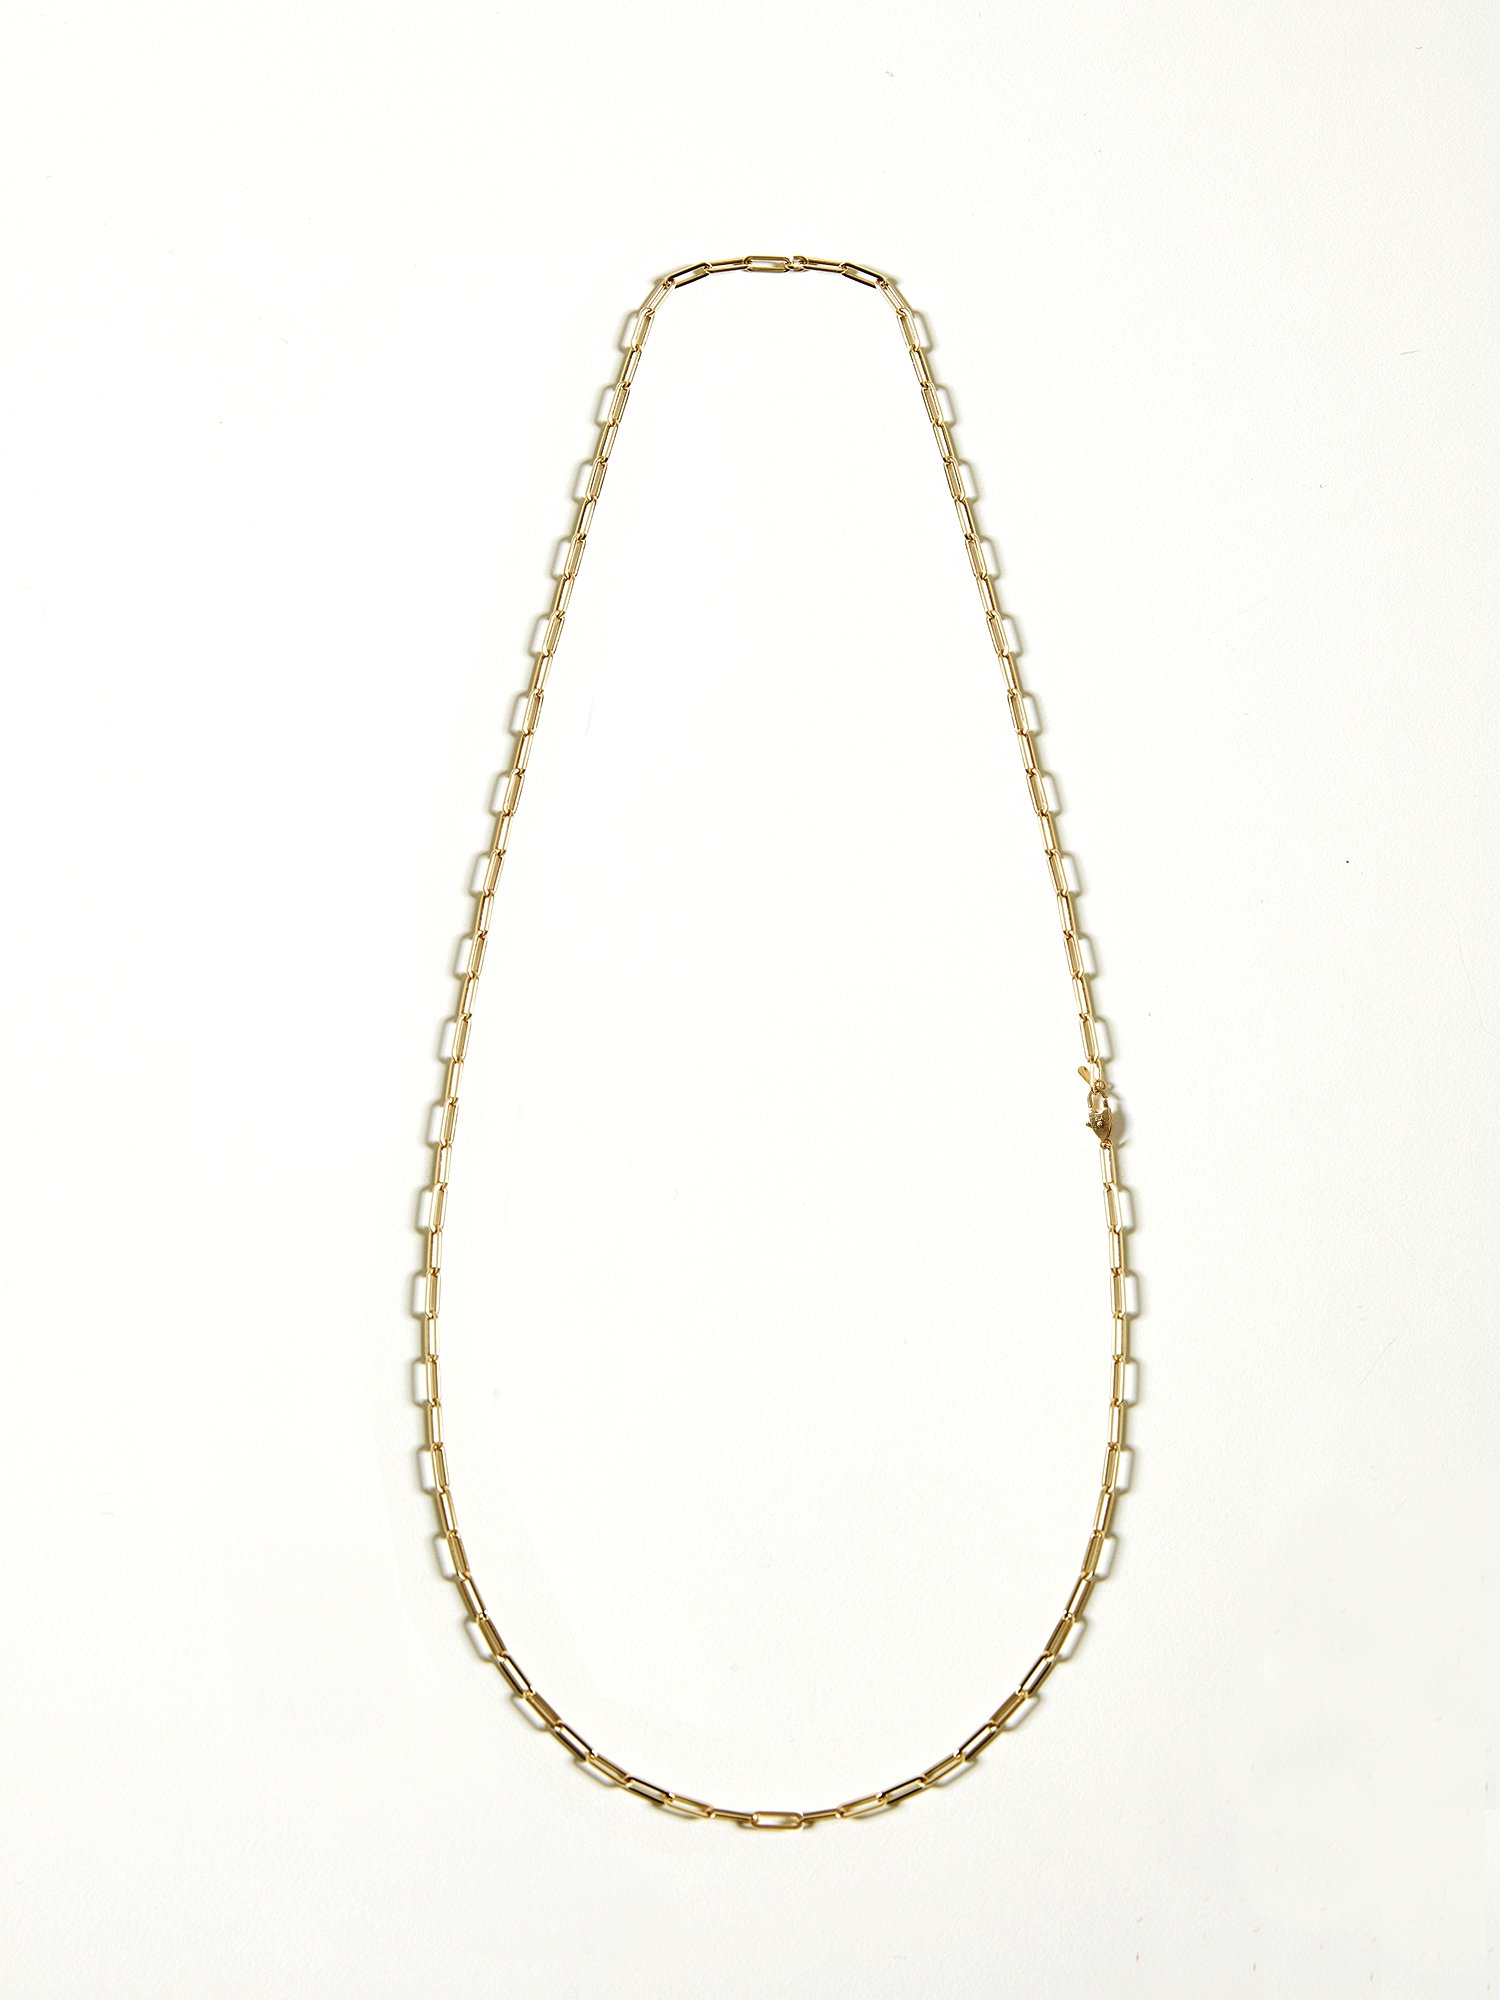 ALCHYMIA / Square cable necklace / 650mm